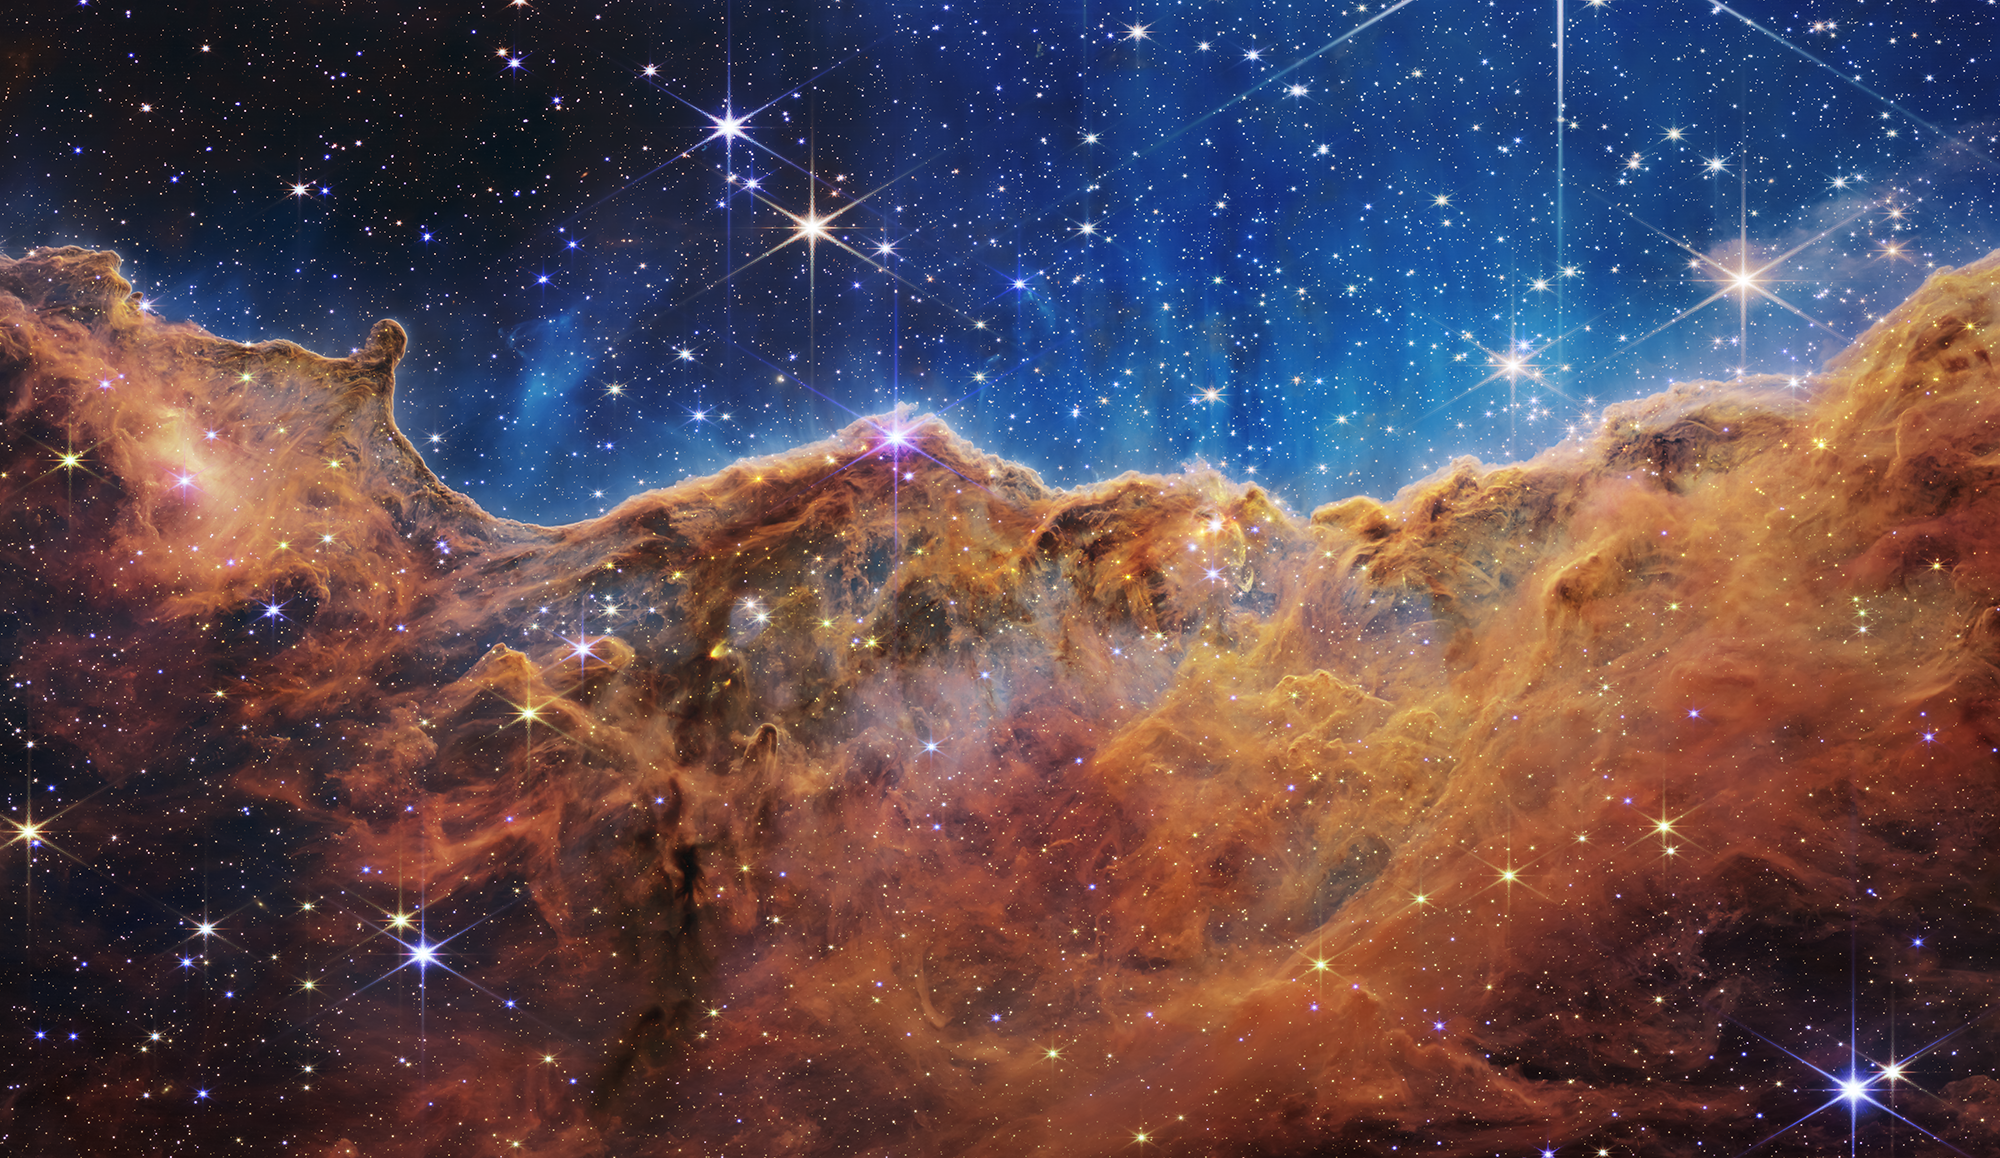 The image looks like a landscape of mountains and valleys with stars in the sky.